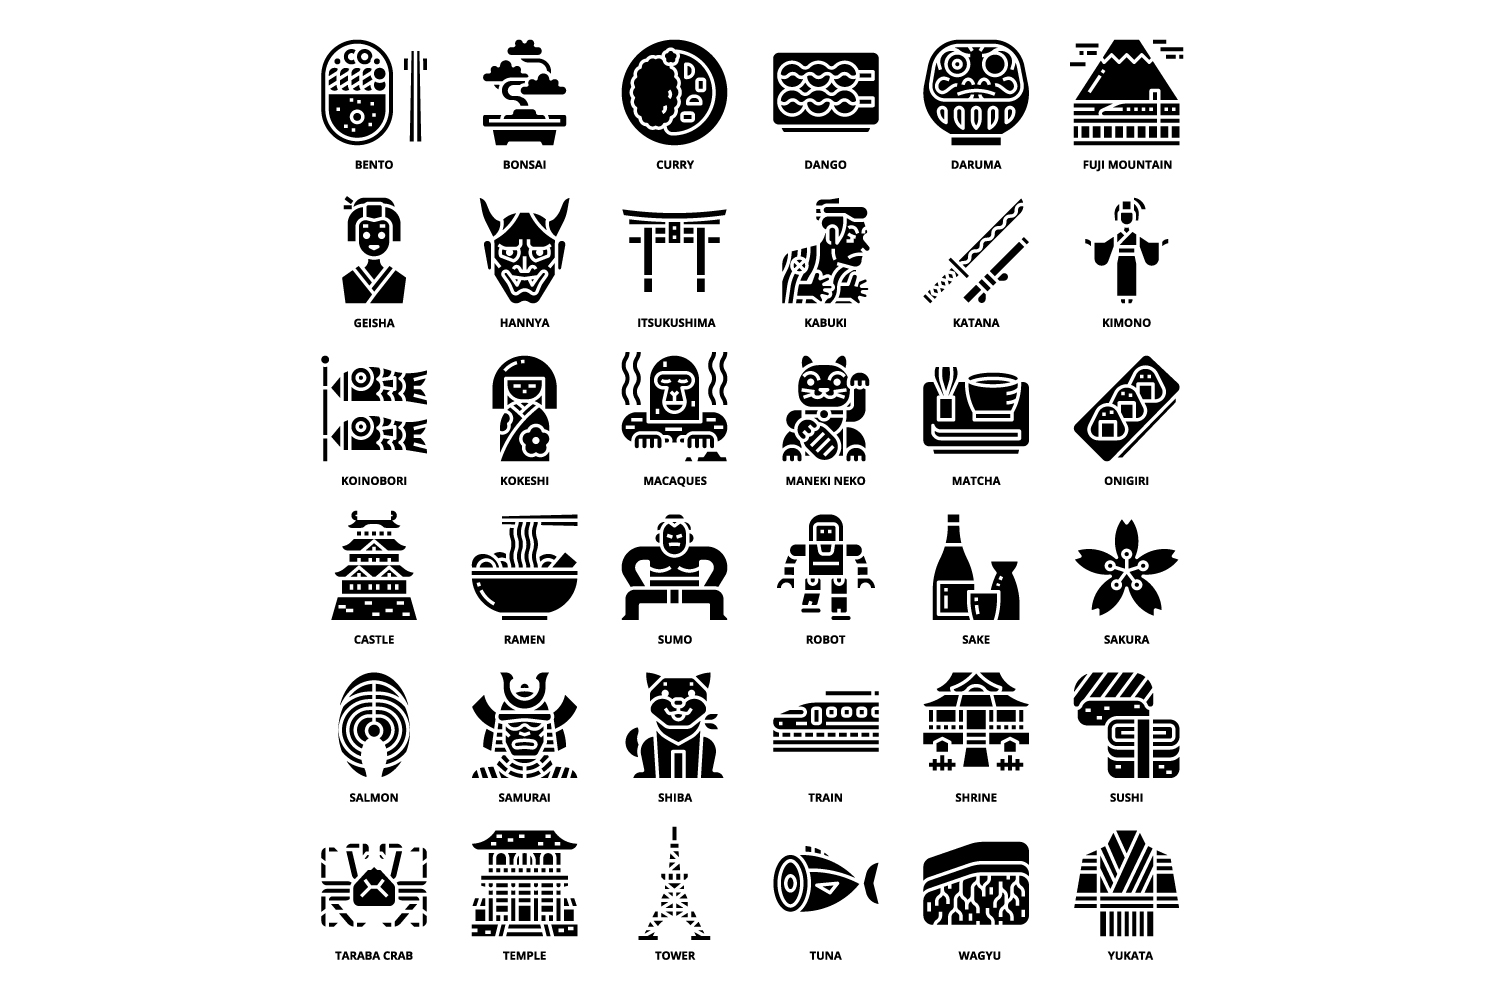 Black and white image of different symbols.